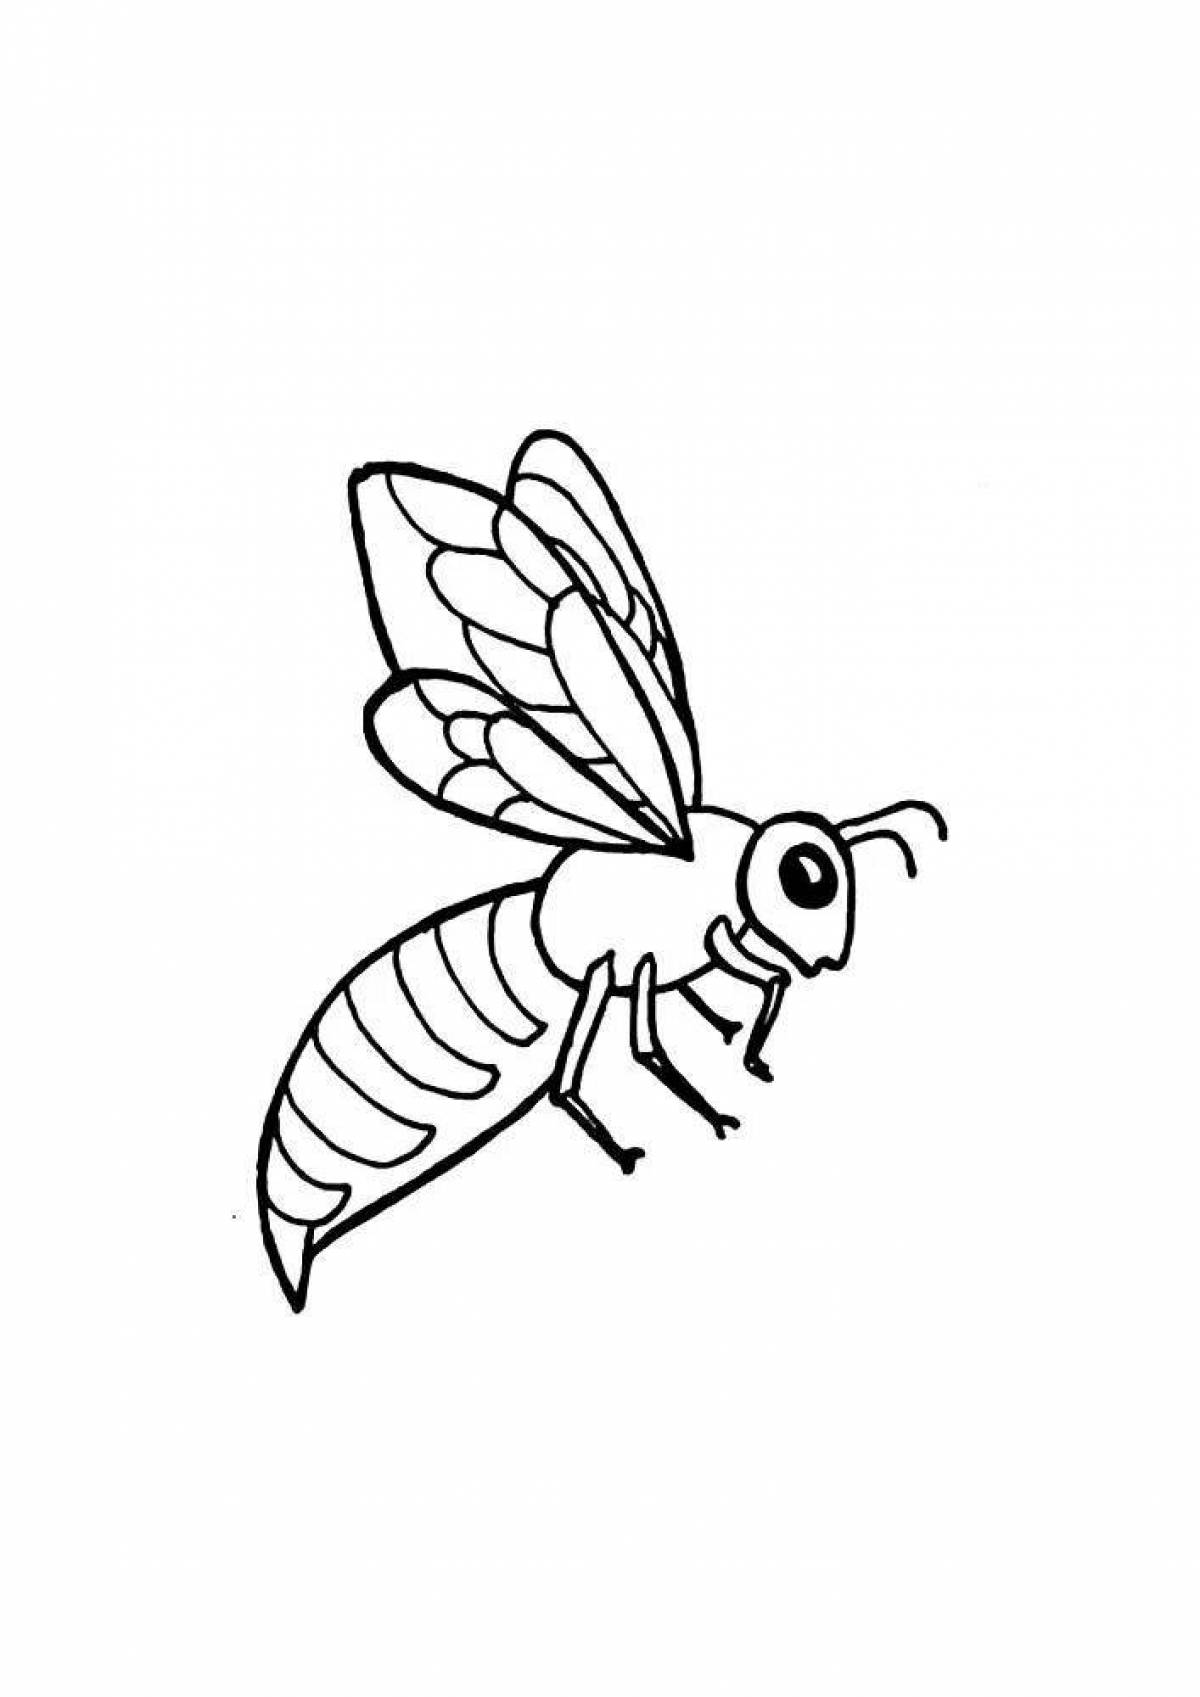 Impressive wasp coloring page for kids